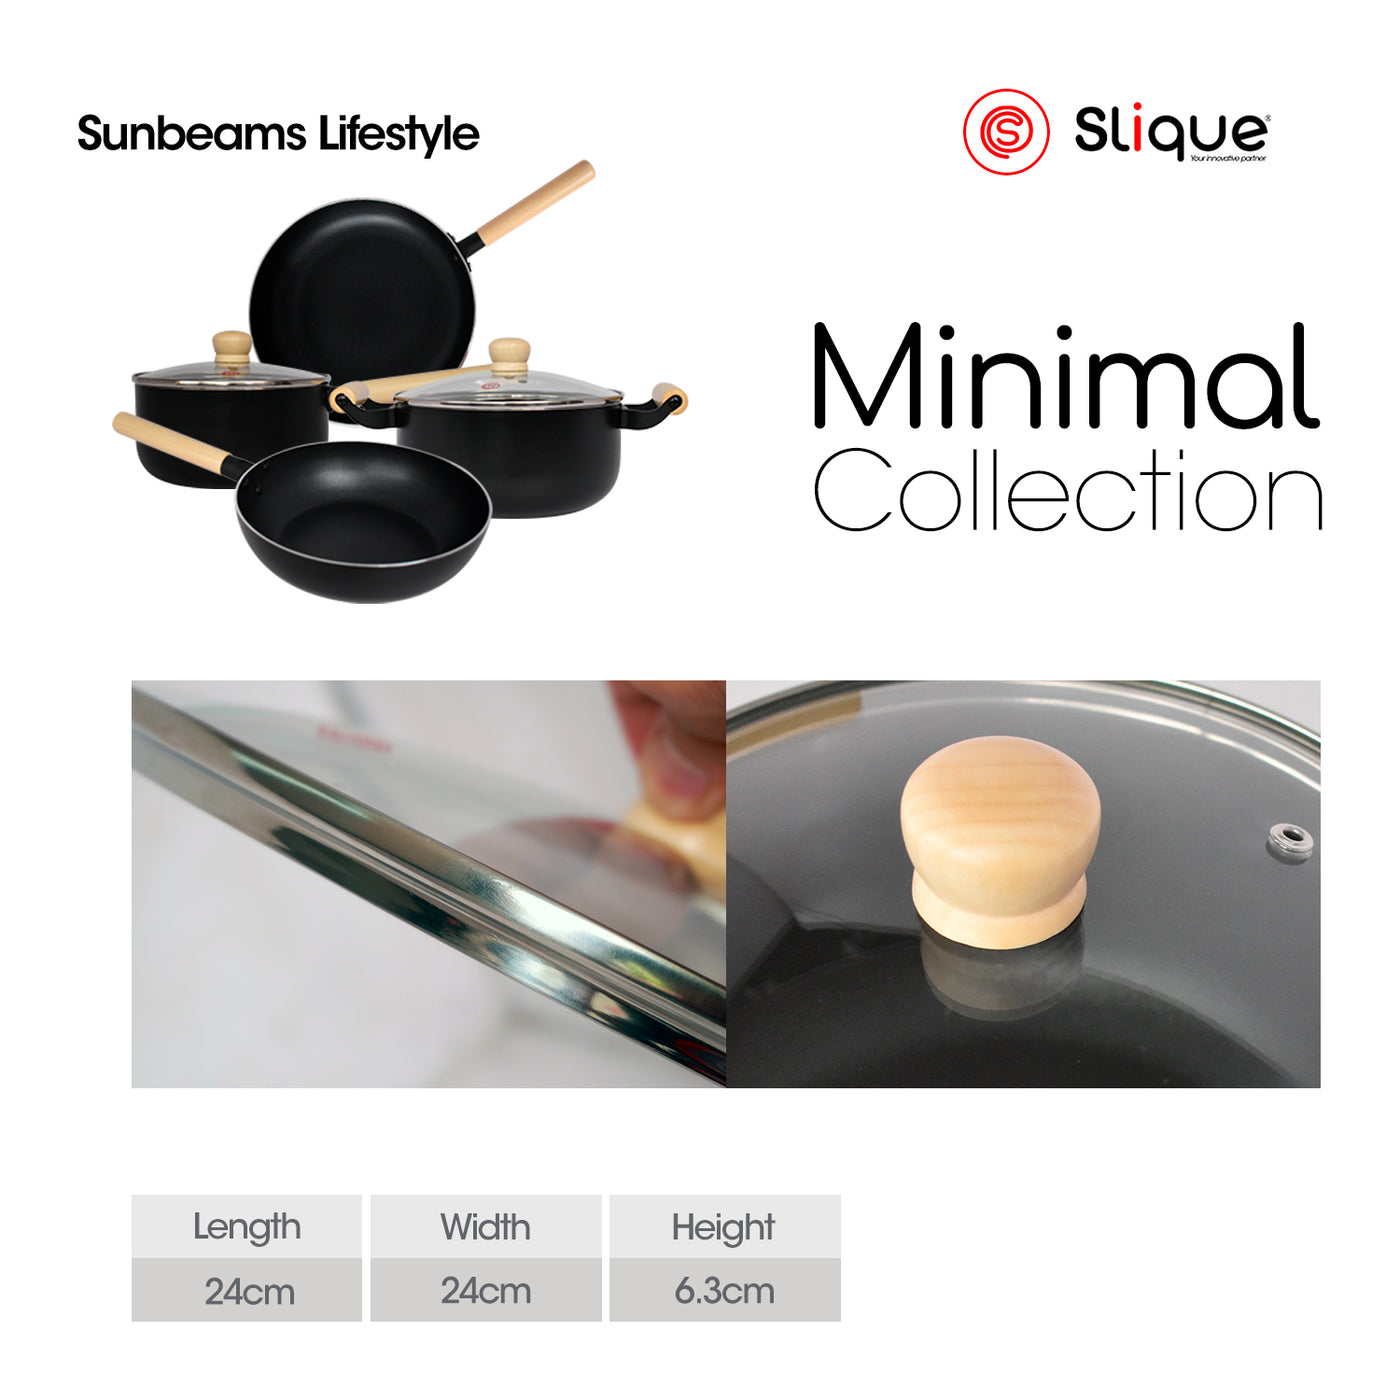 Slique Glass Lid Tempered Glass & Stainless Steel Rim with Wooden Knob